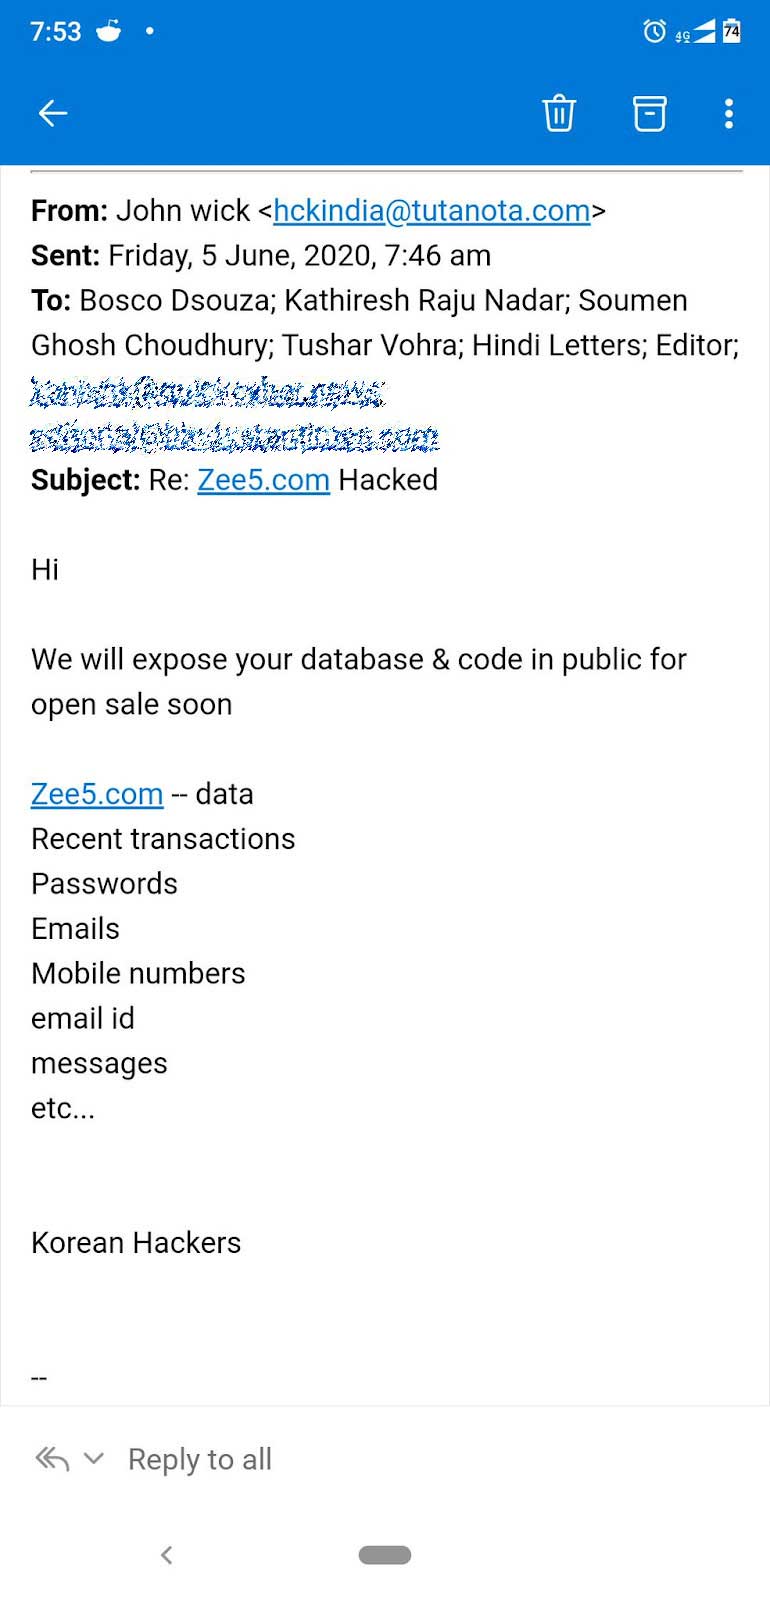 Email sent from alleged hackers